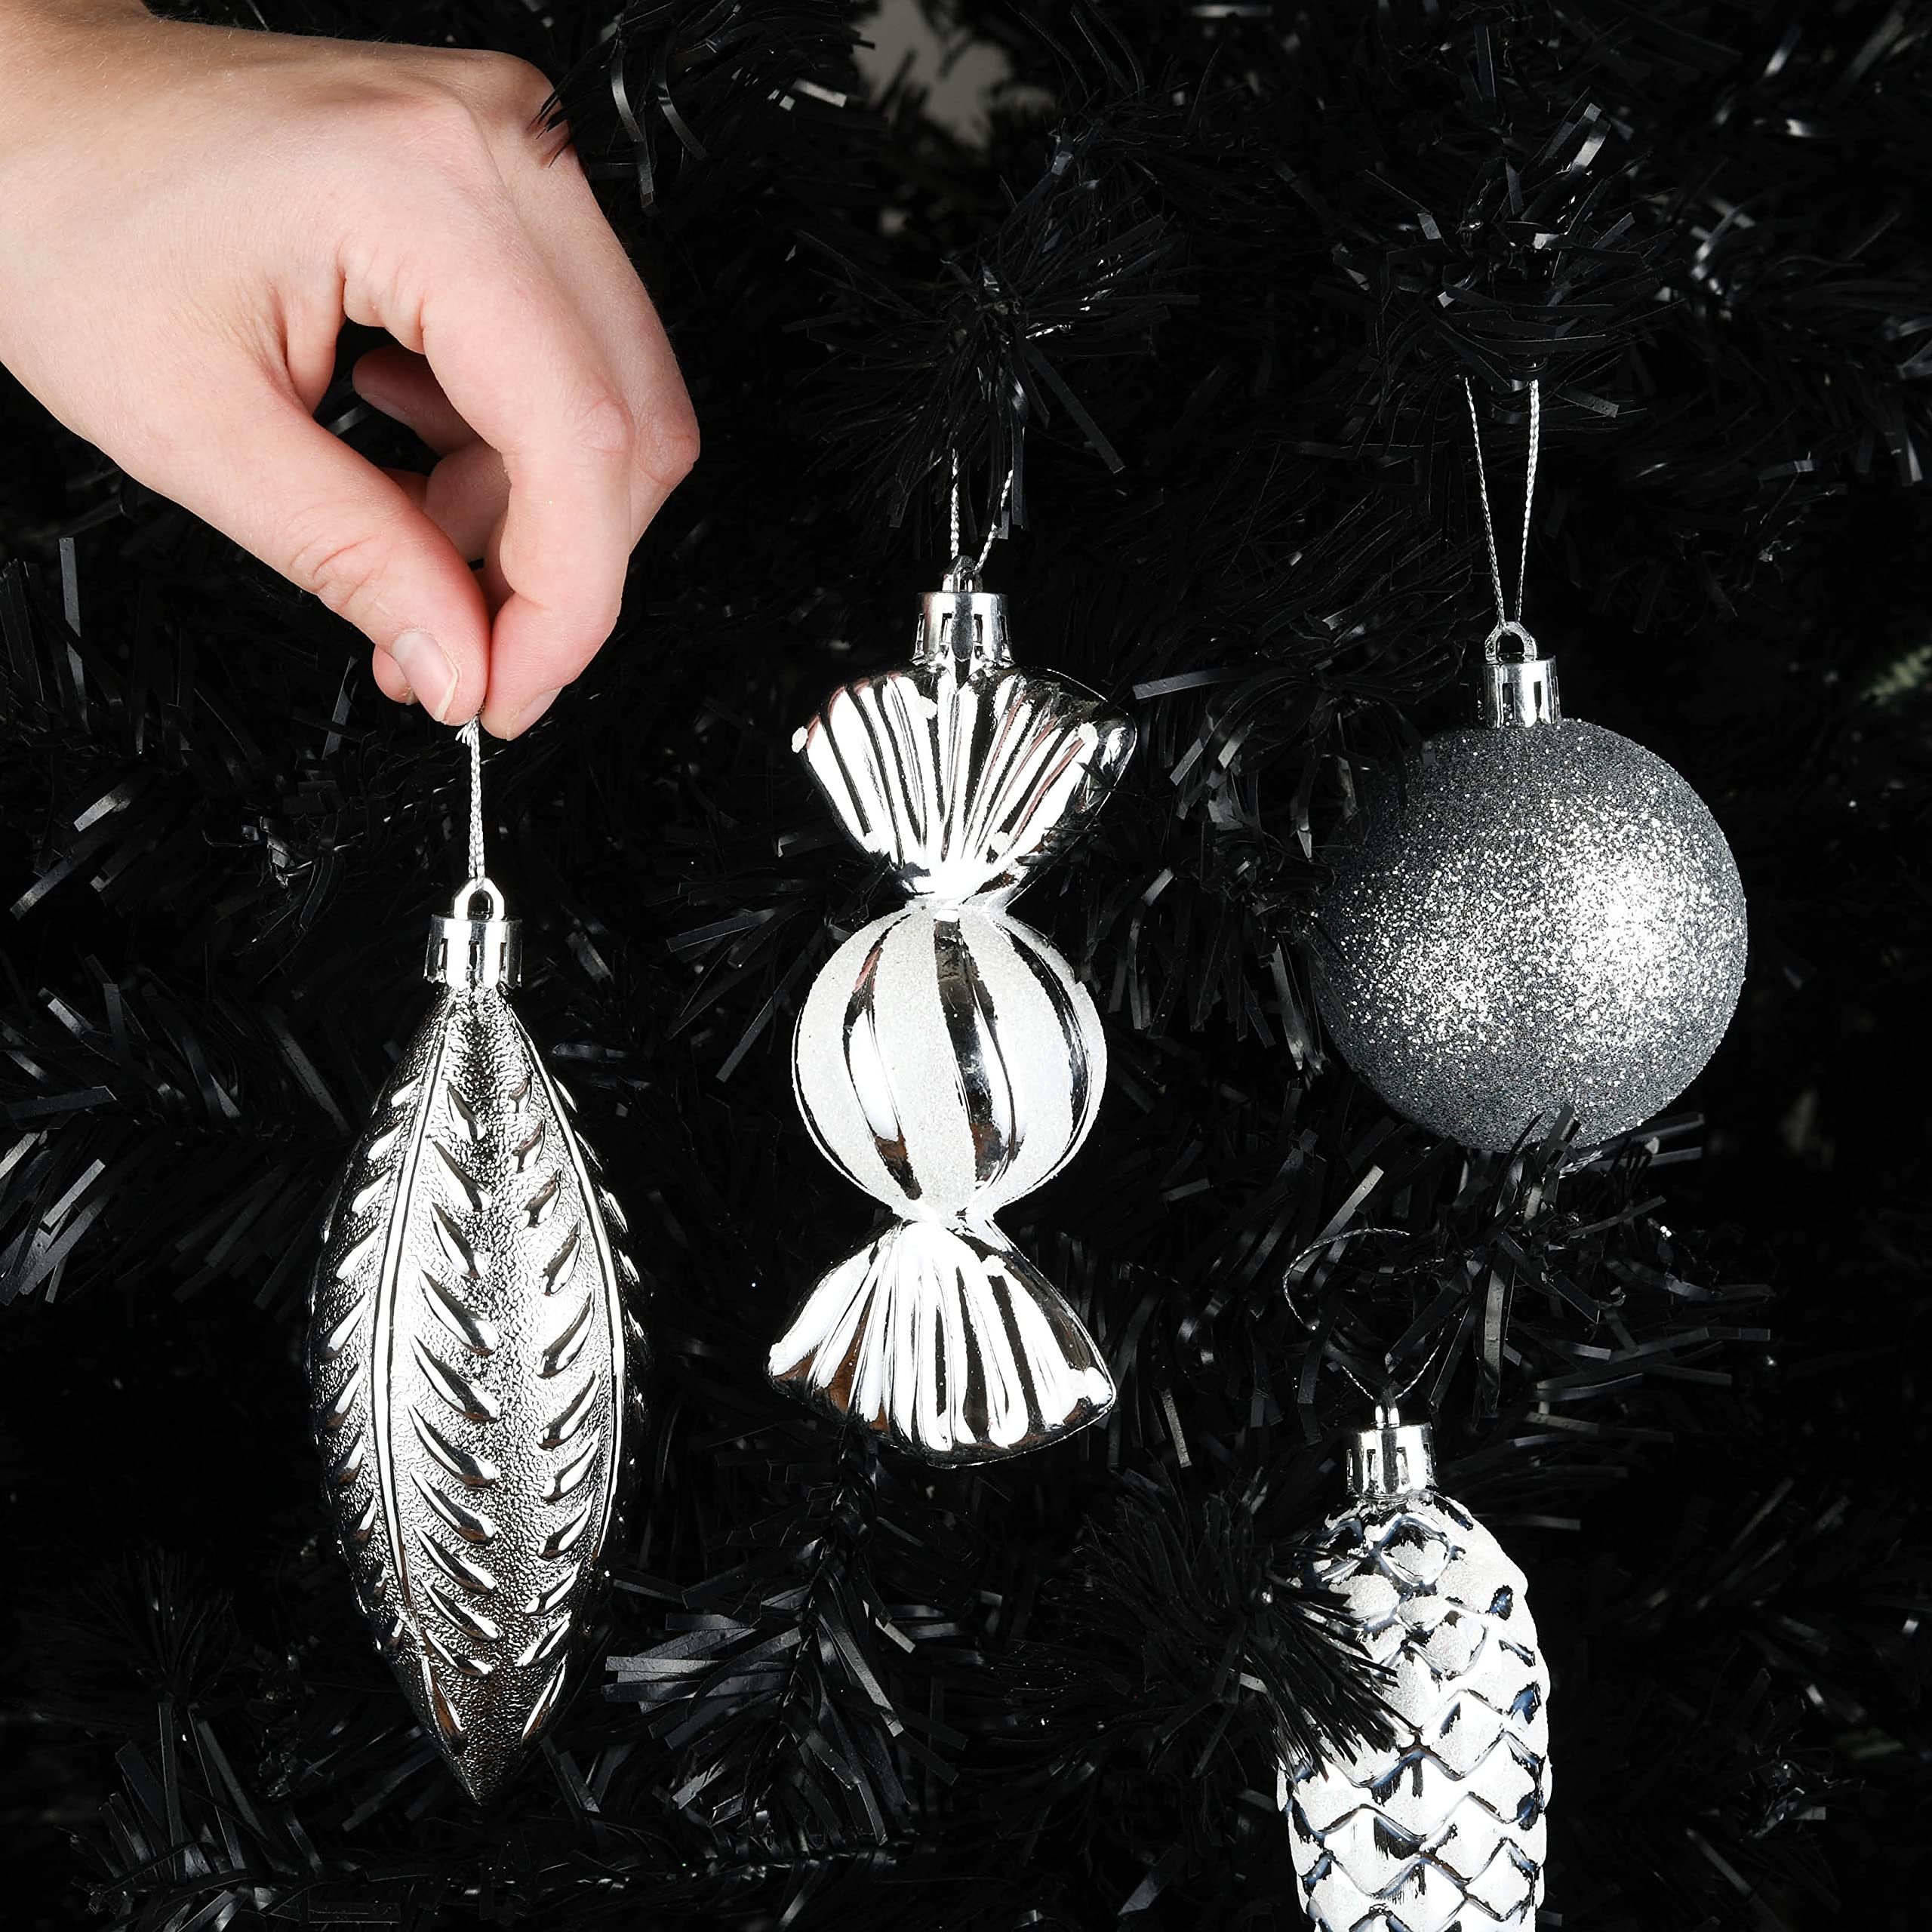 Prextex Christmas Ball Ornaments for Christmas Decorations (Silver) | 24 pcs Xmas Tree Shatterproof Ornaments with Hanging Loop for Holiday, Wreath and Party Decorations